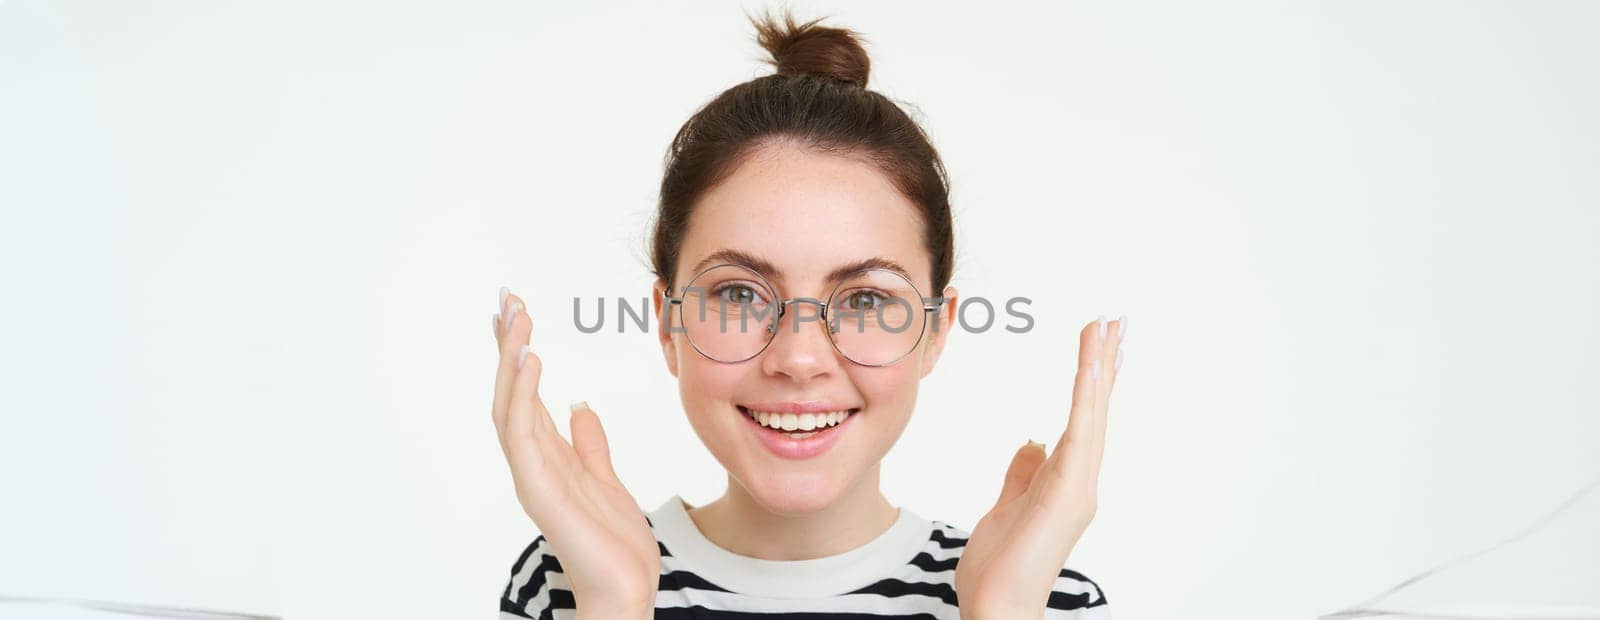 Close up portrait of happy, beautiful young woman clapping, looks pleased and smiling, applause you, standing over white background.